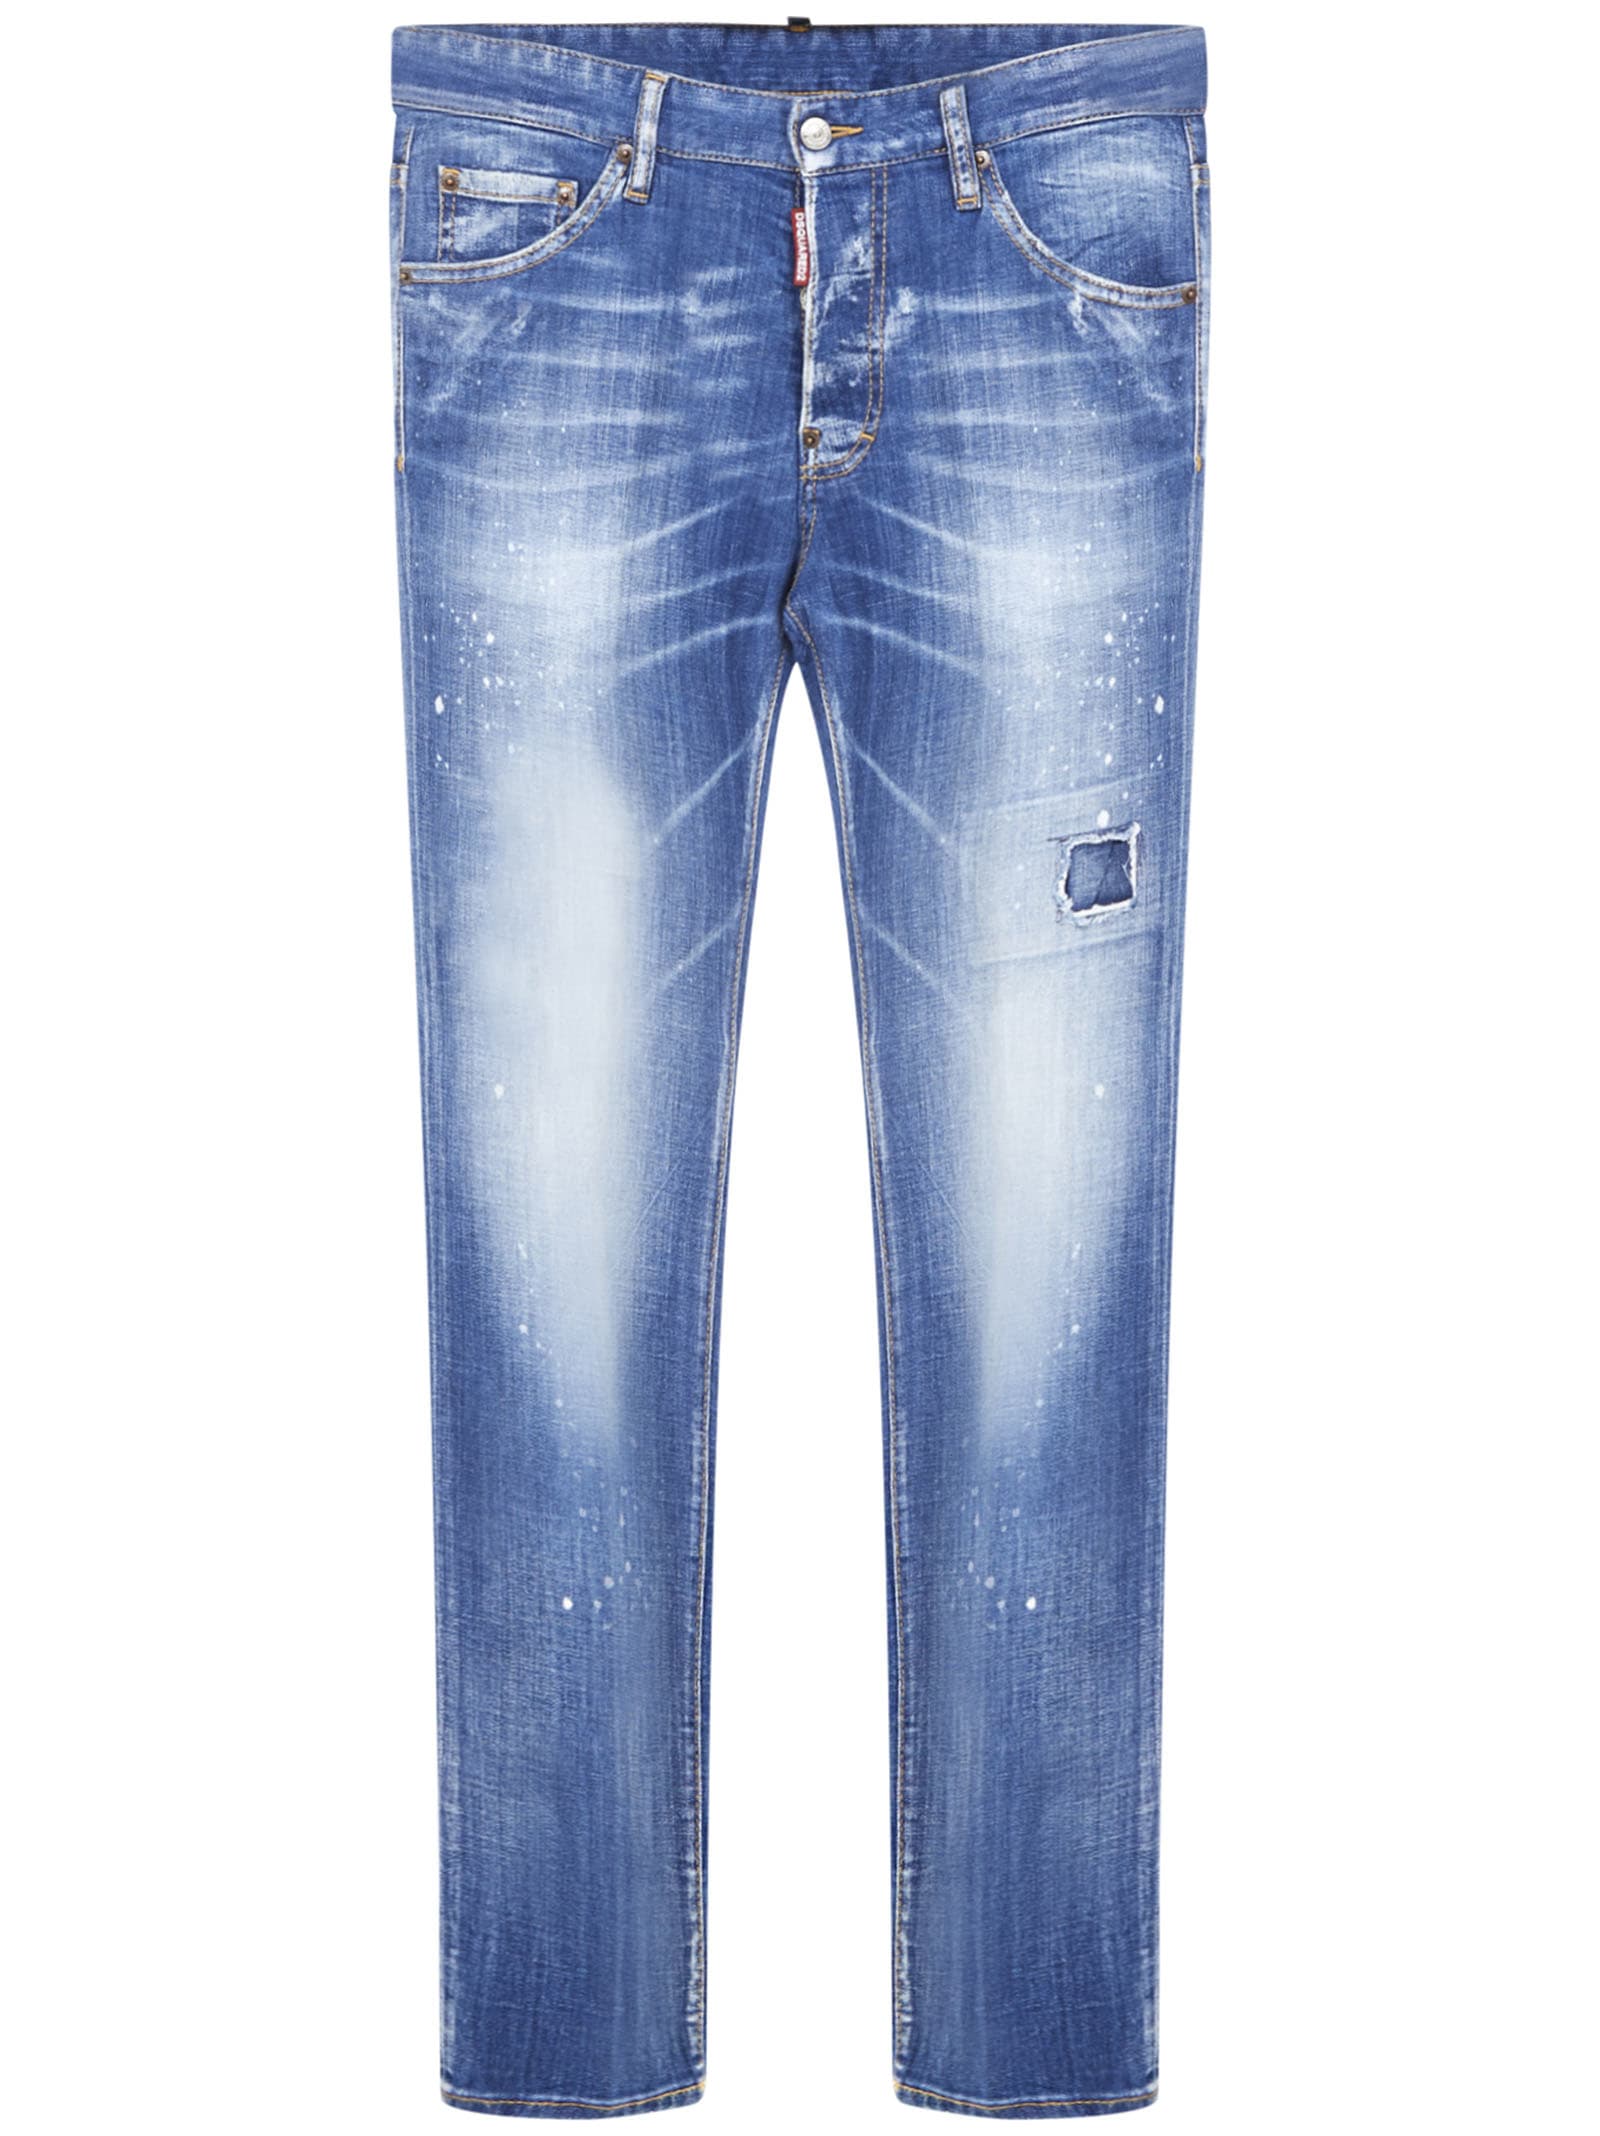 jeans similar to dsquared2